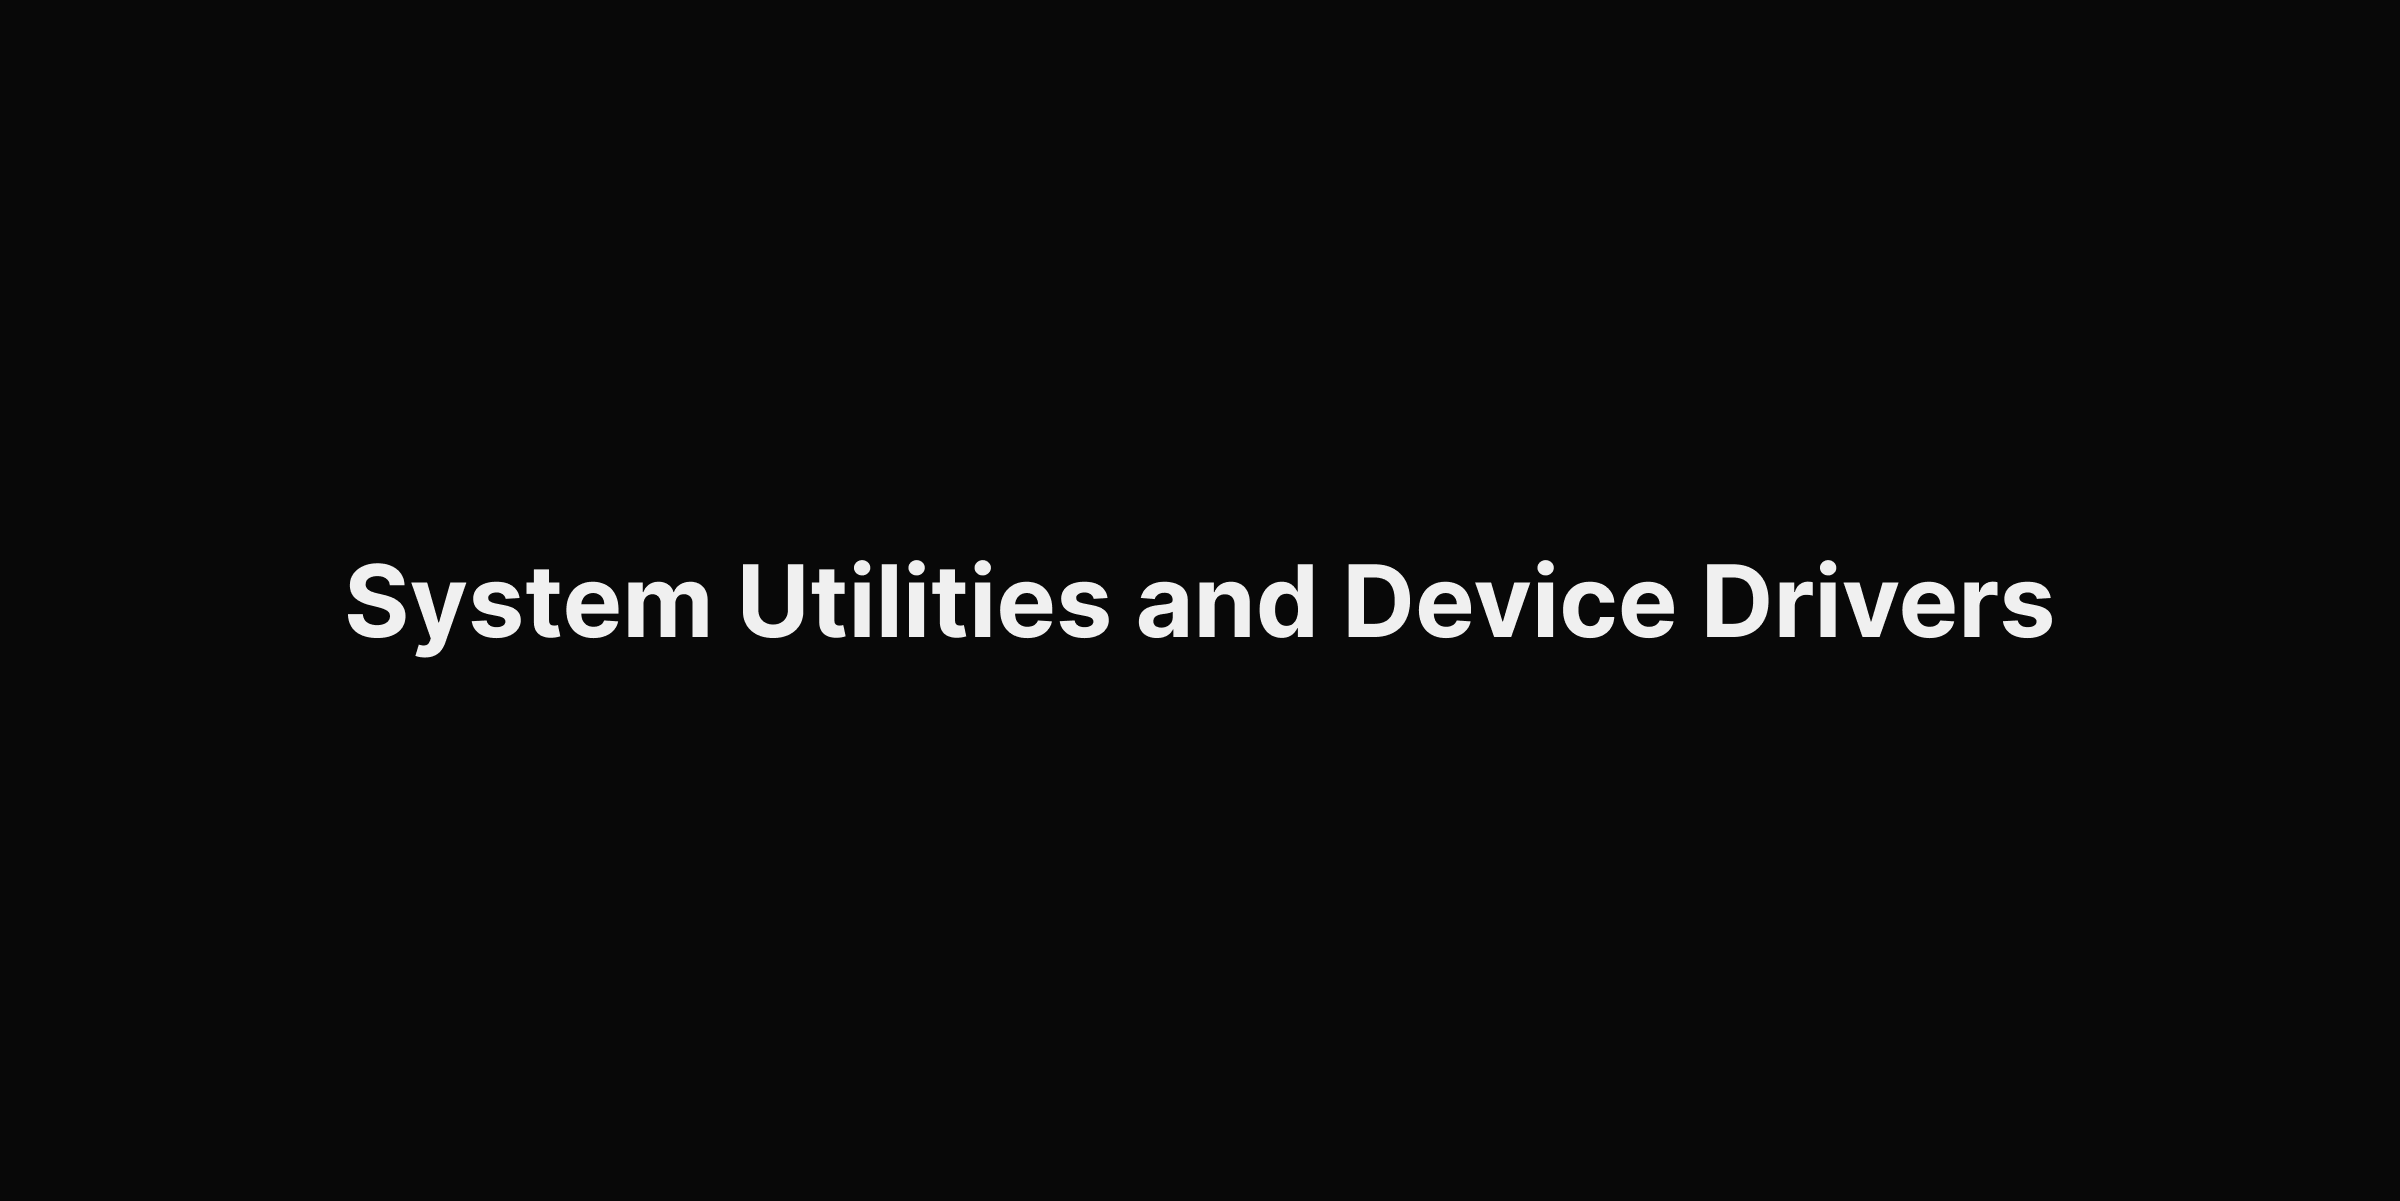 System utilities and device drivers